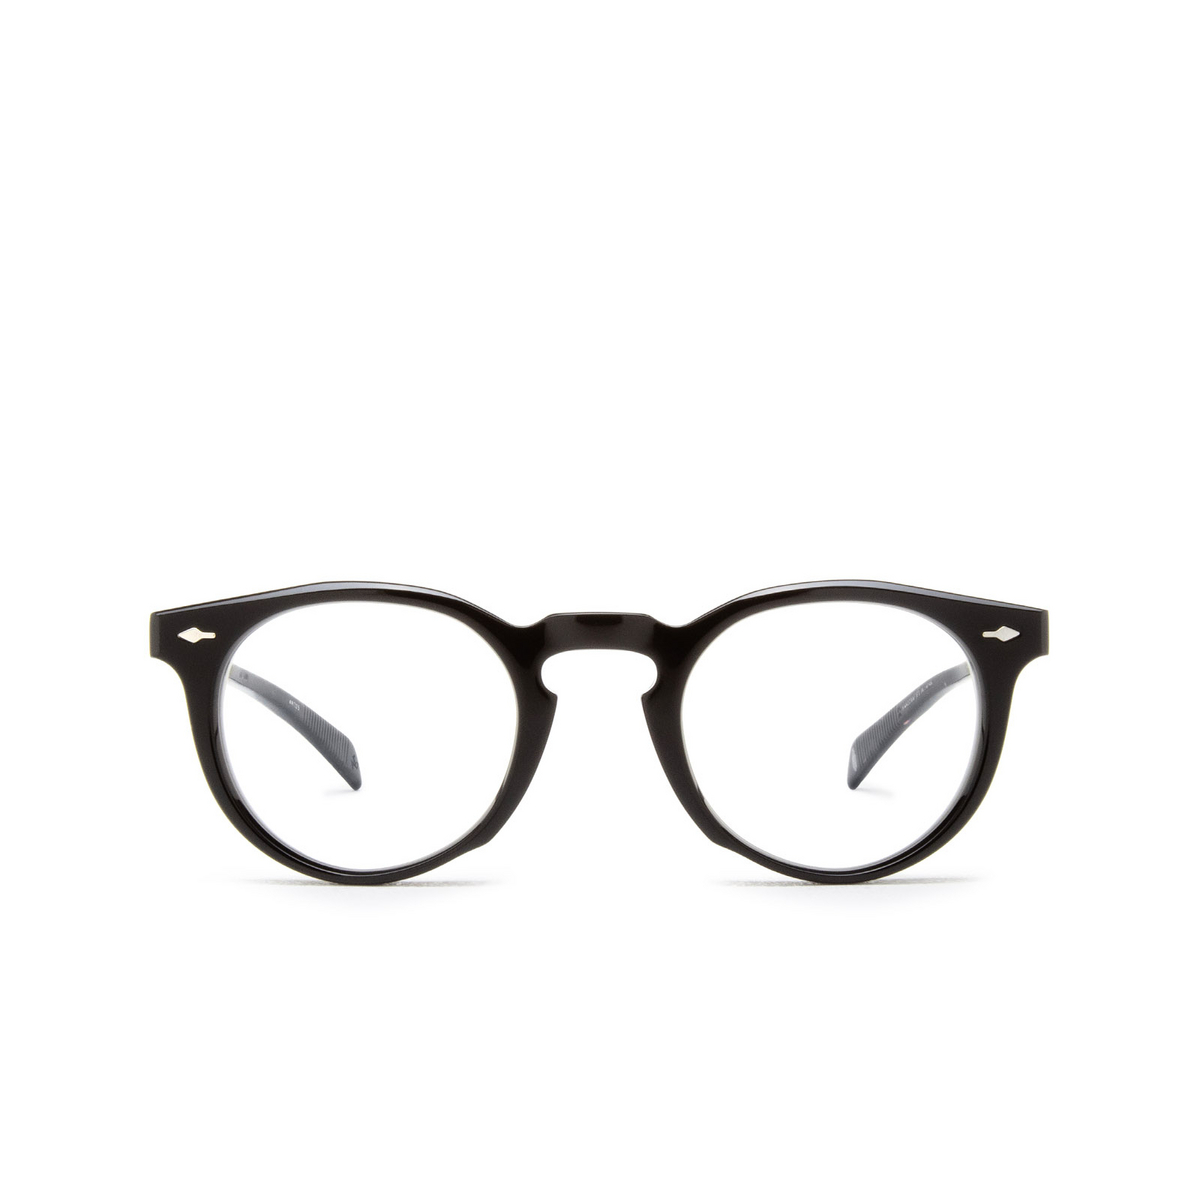 Jacques Marie Mage PERCIER Eyeglasses MARQUINA - front view